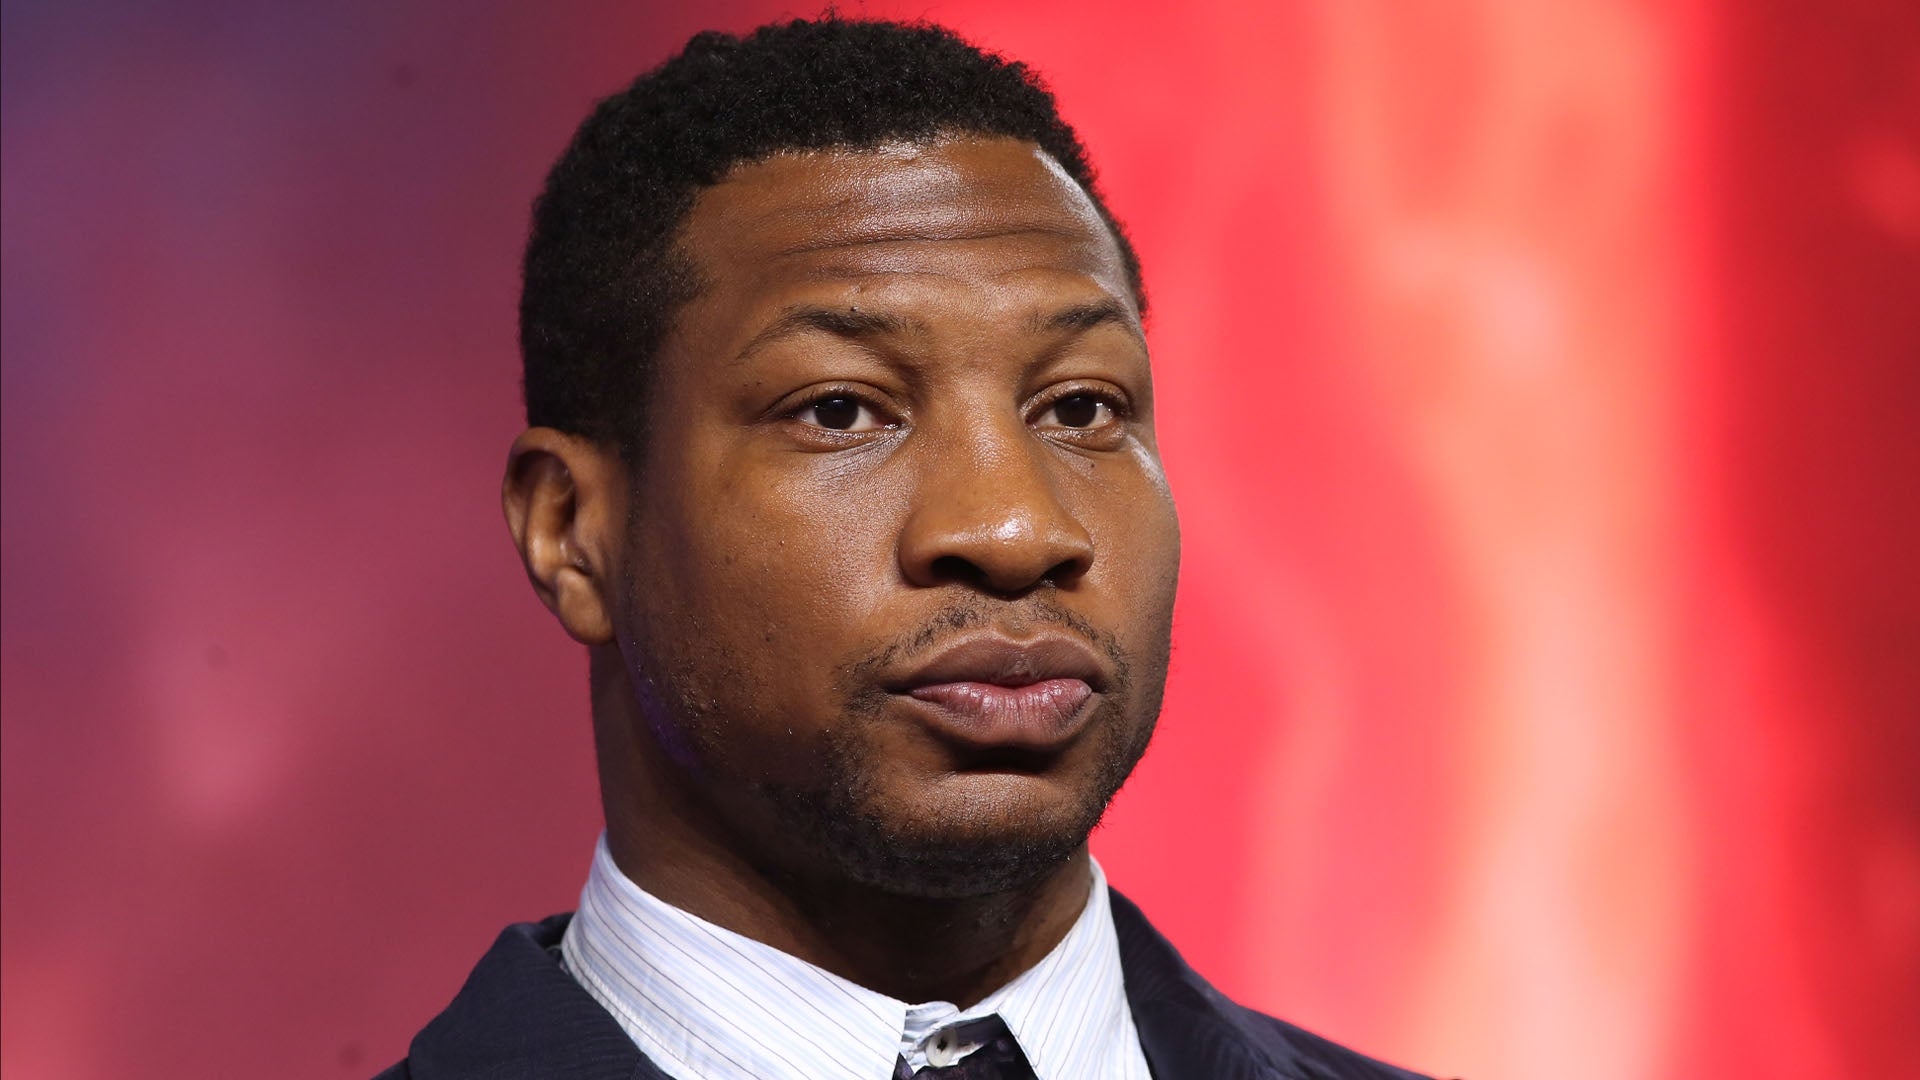 Jonathan Majors Denies Claims After Being Arrested on Charges of Alleged Assault With Woman